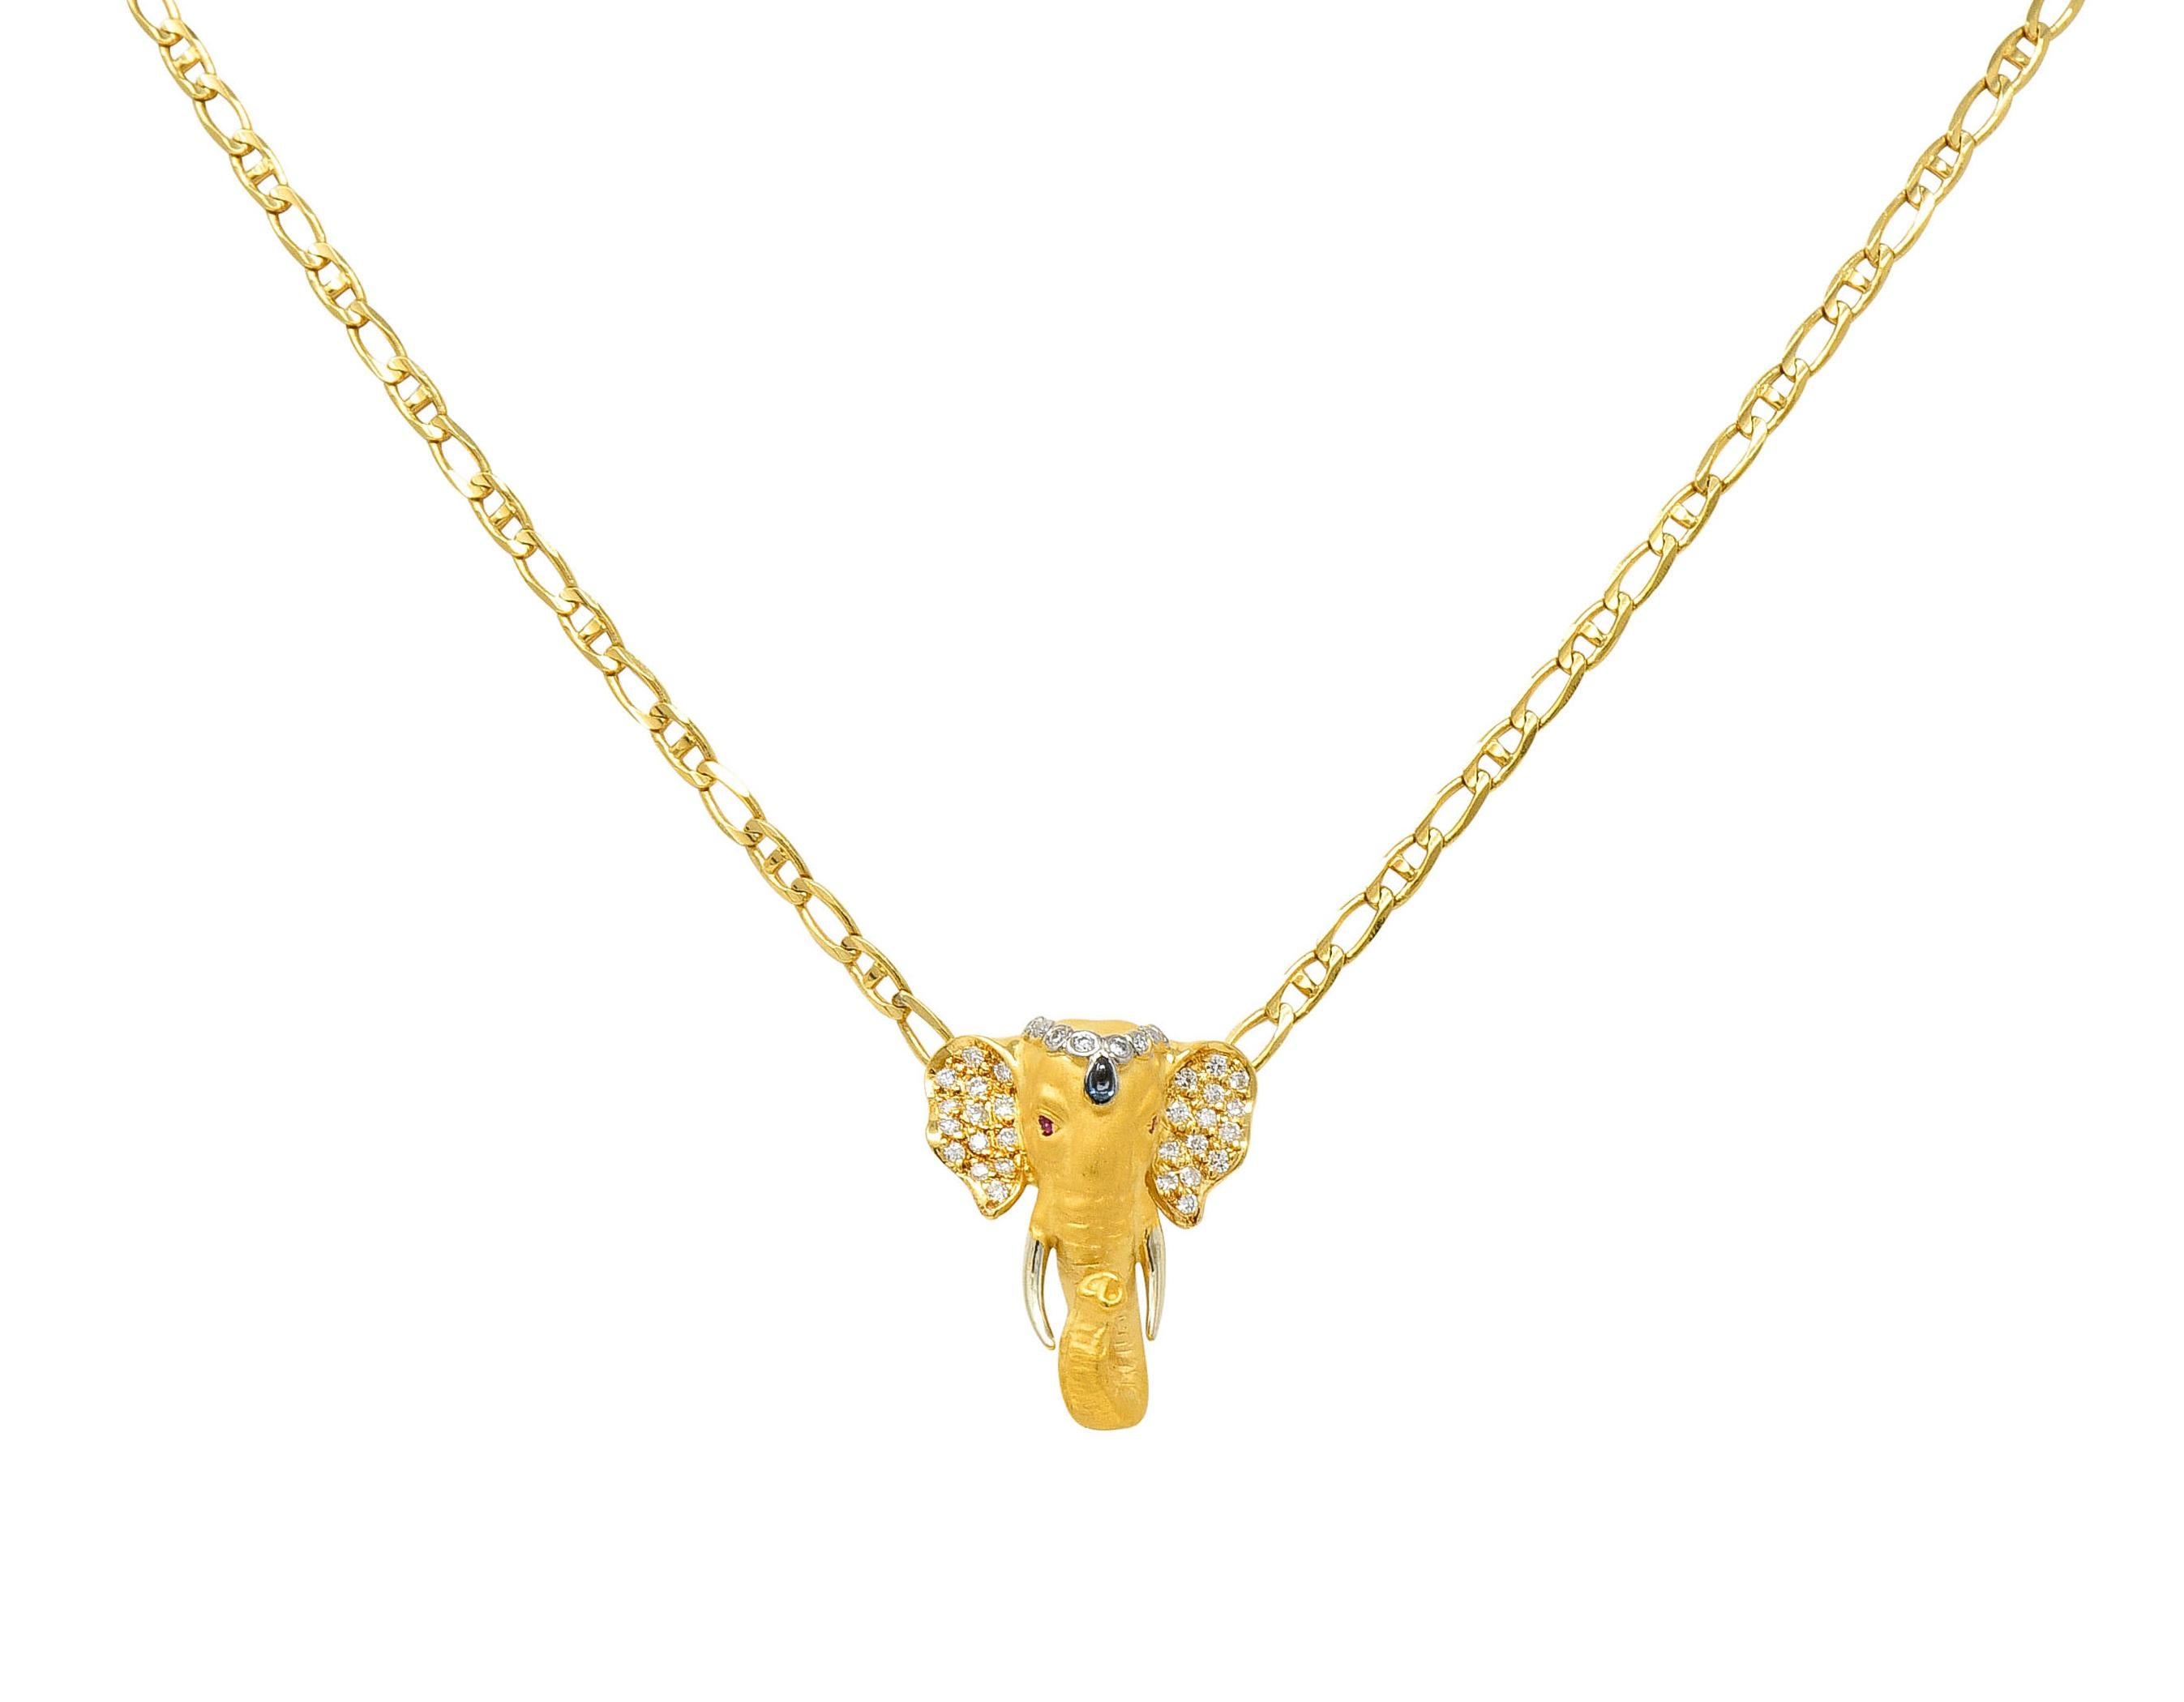 Cuban style chain features a highly rendered elephant bust at its center

Elephant is matte gold with an upturned trunk - symbolic of good luck

Accented by round brilliant cut diamonds, a pear cabochon sapphire, and round cut rubies

Weighing in